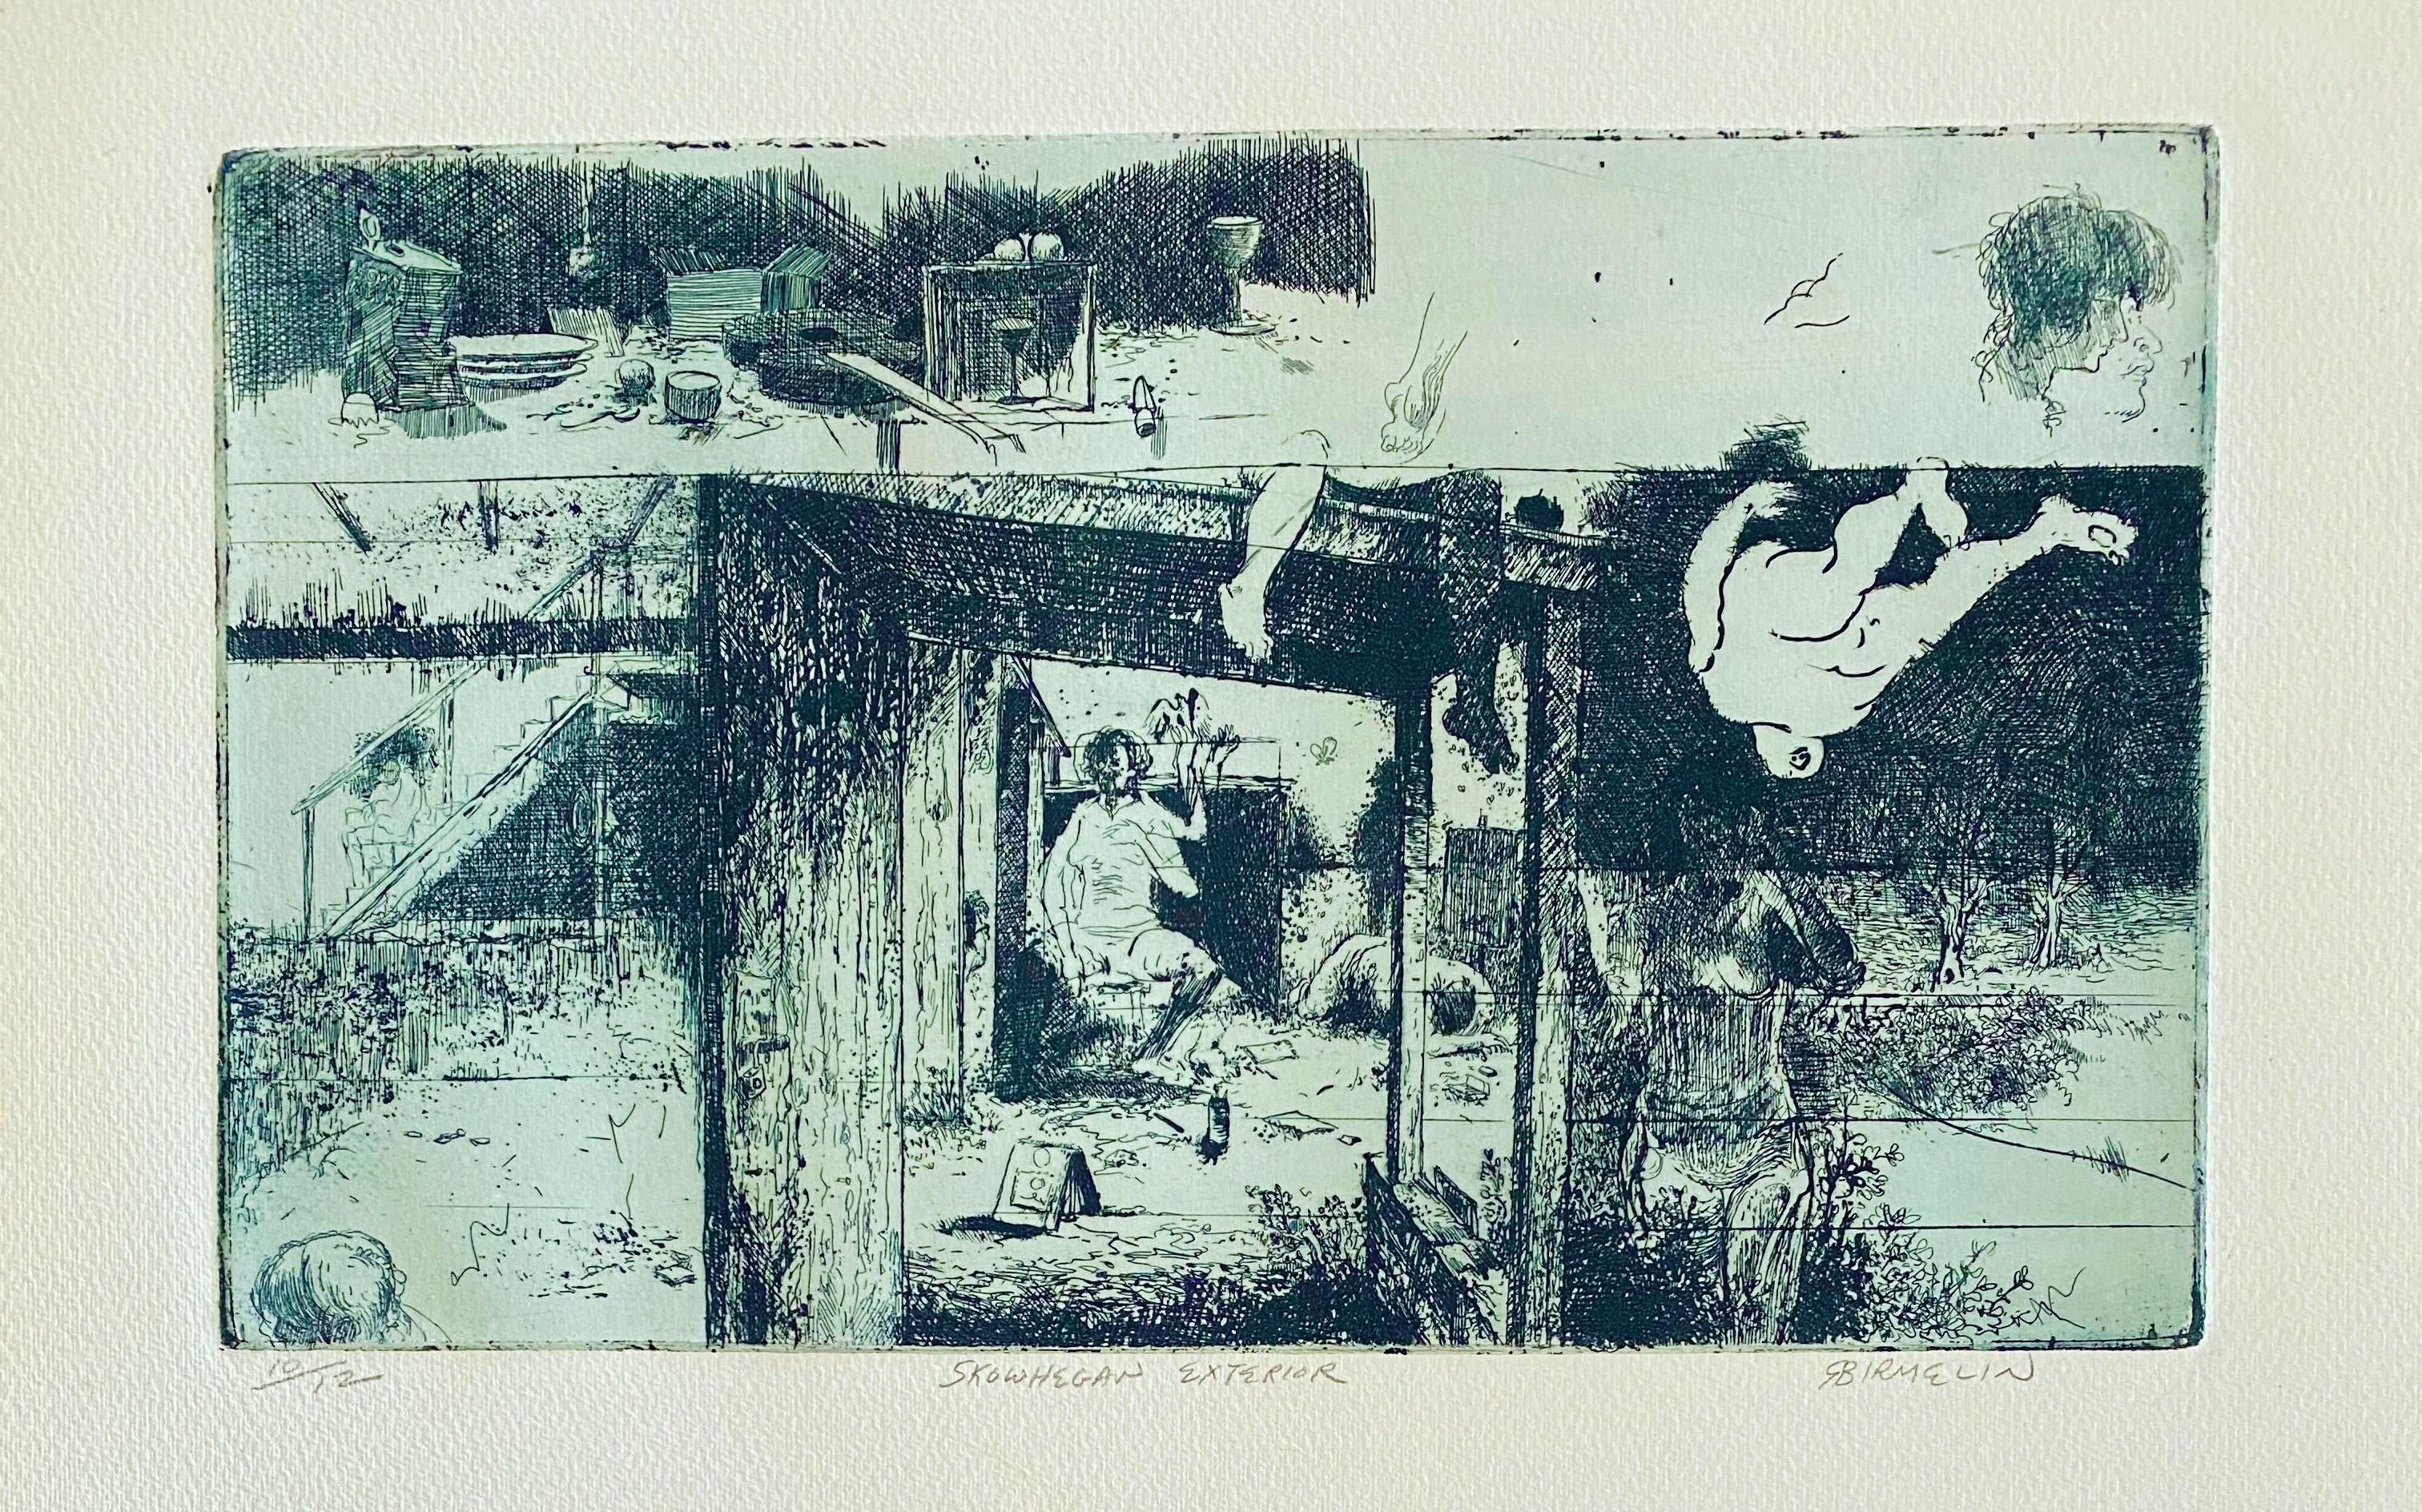 Skowhegan Exterior, American Modernist Abstract Etching